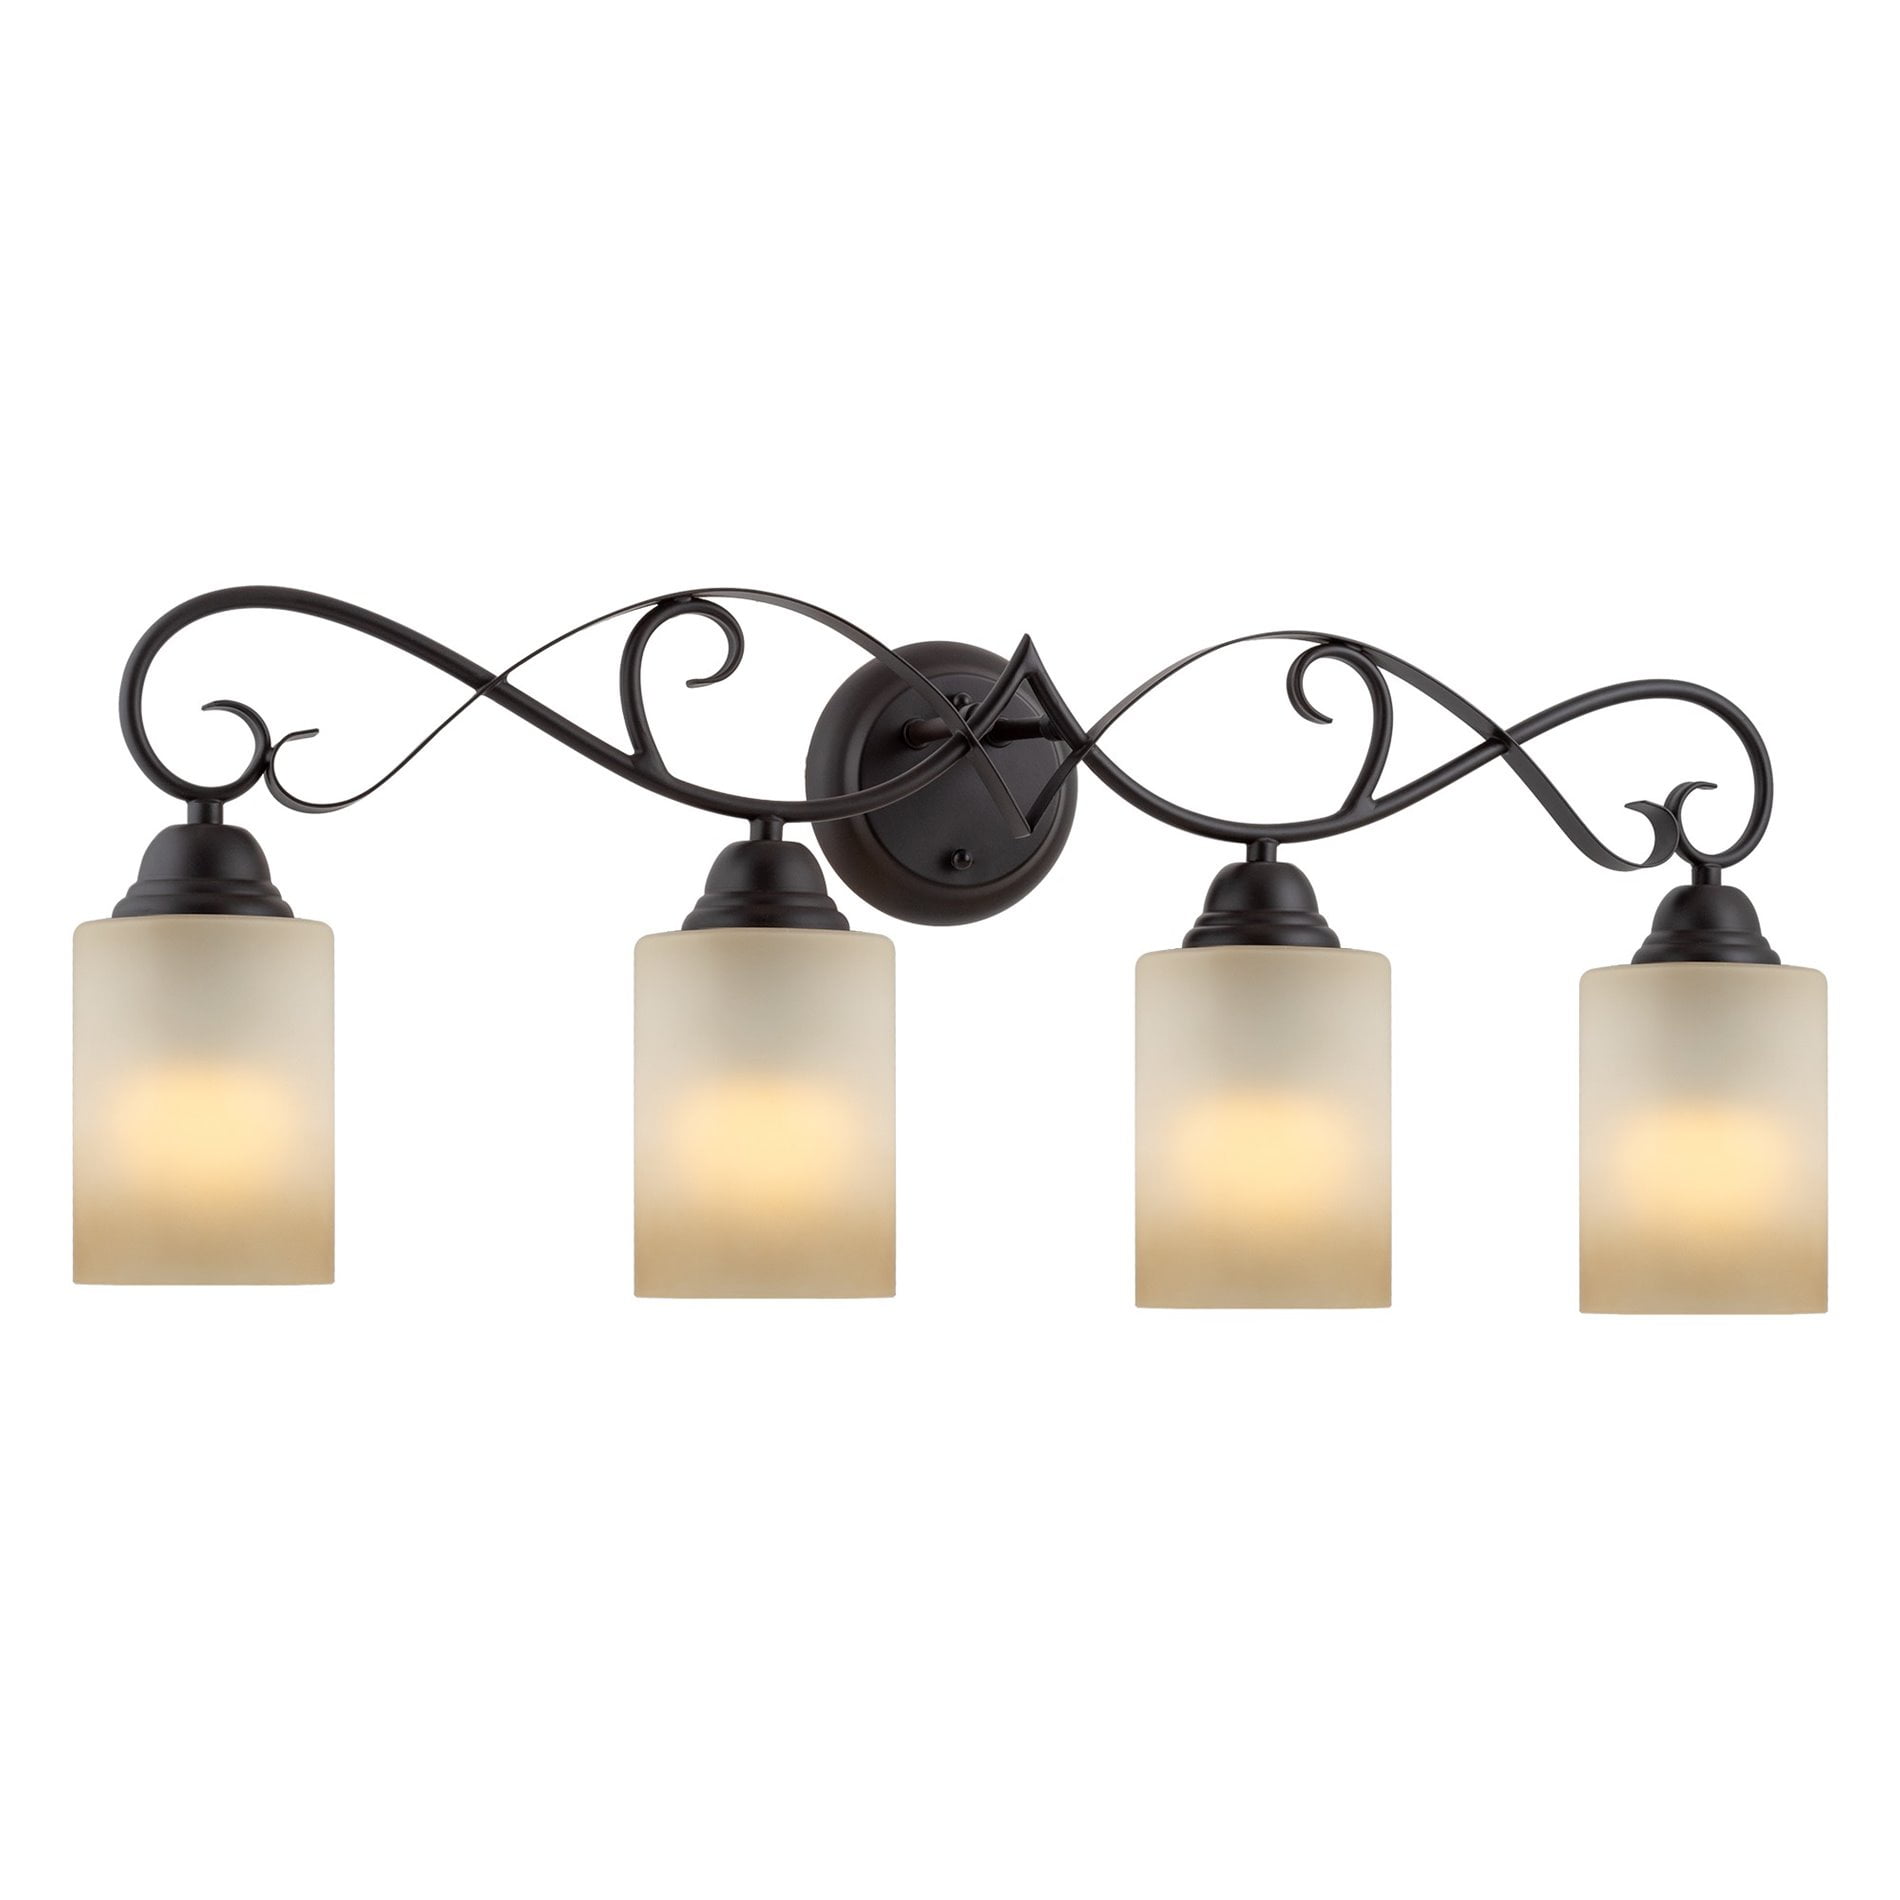 Amber Frosted Glass Shades Oil Rubbed, Oil Rubbed Bronze Vanity Light Fixture